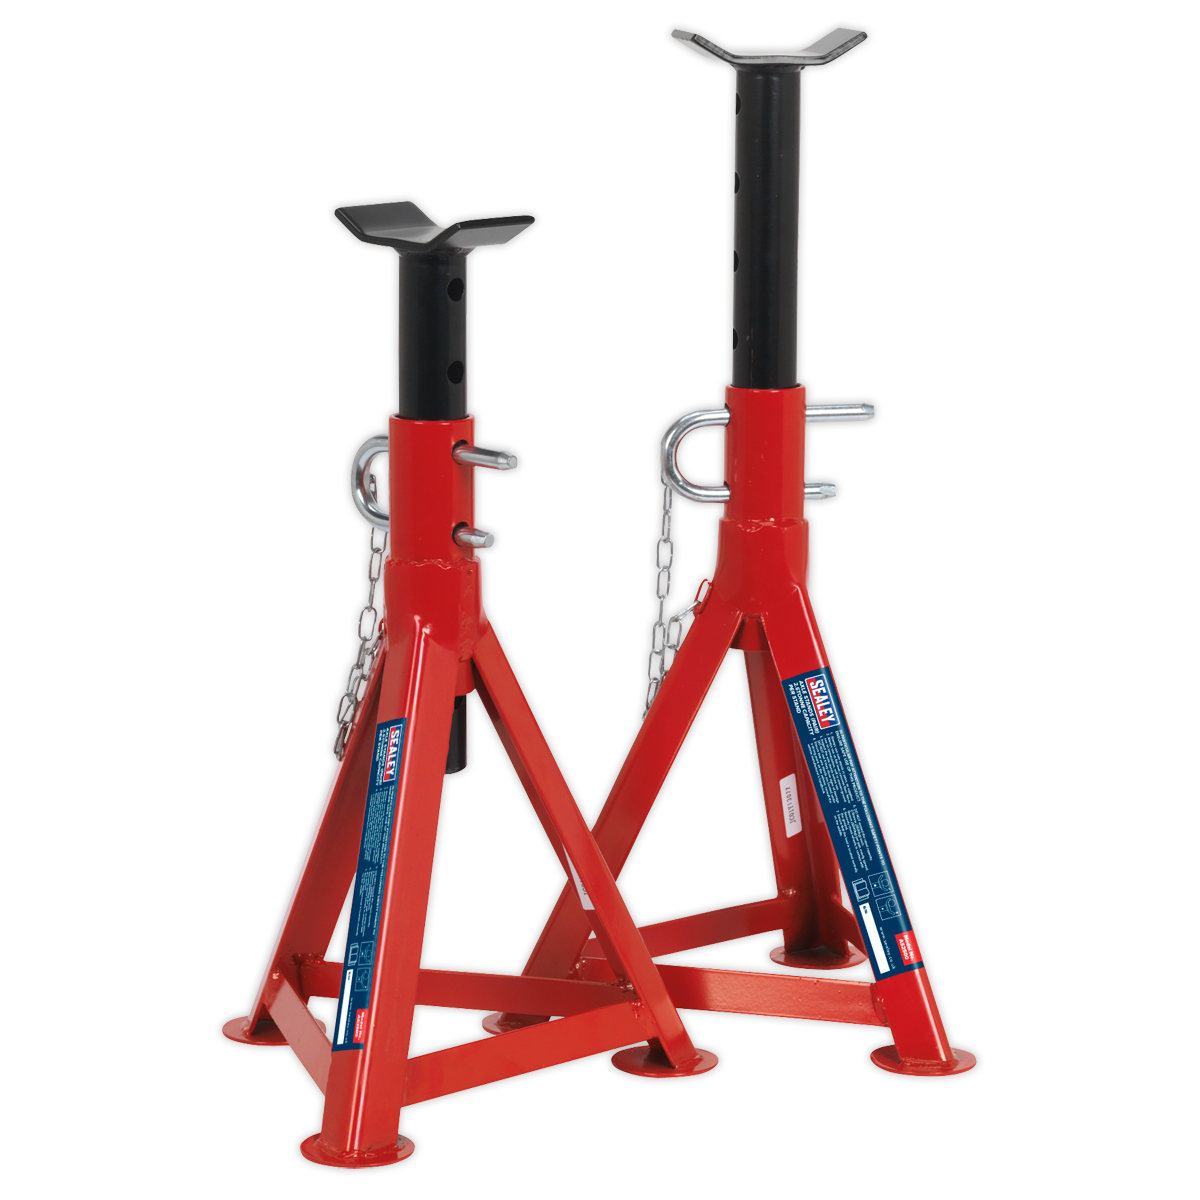 Axle Stands (Pair) 2.5 Tonne Capacity per Stand - AS2500 - Farming Parts